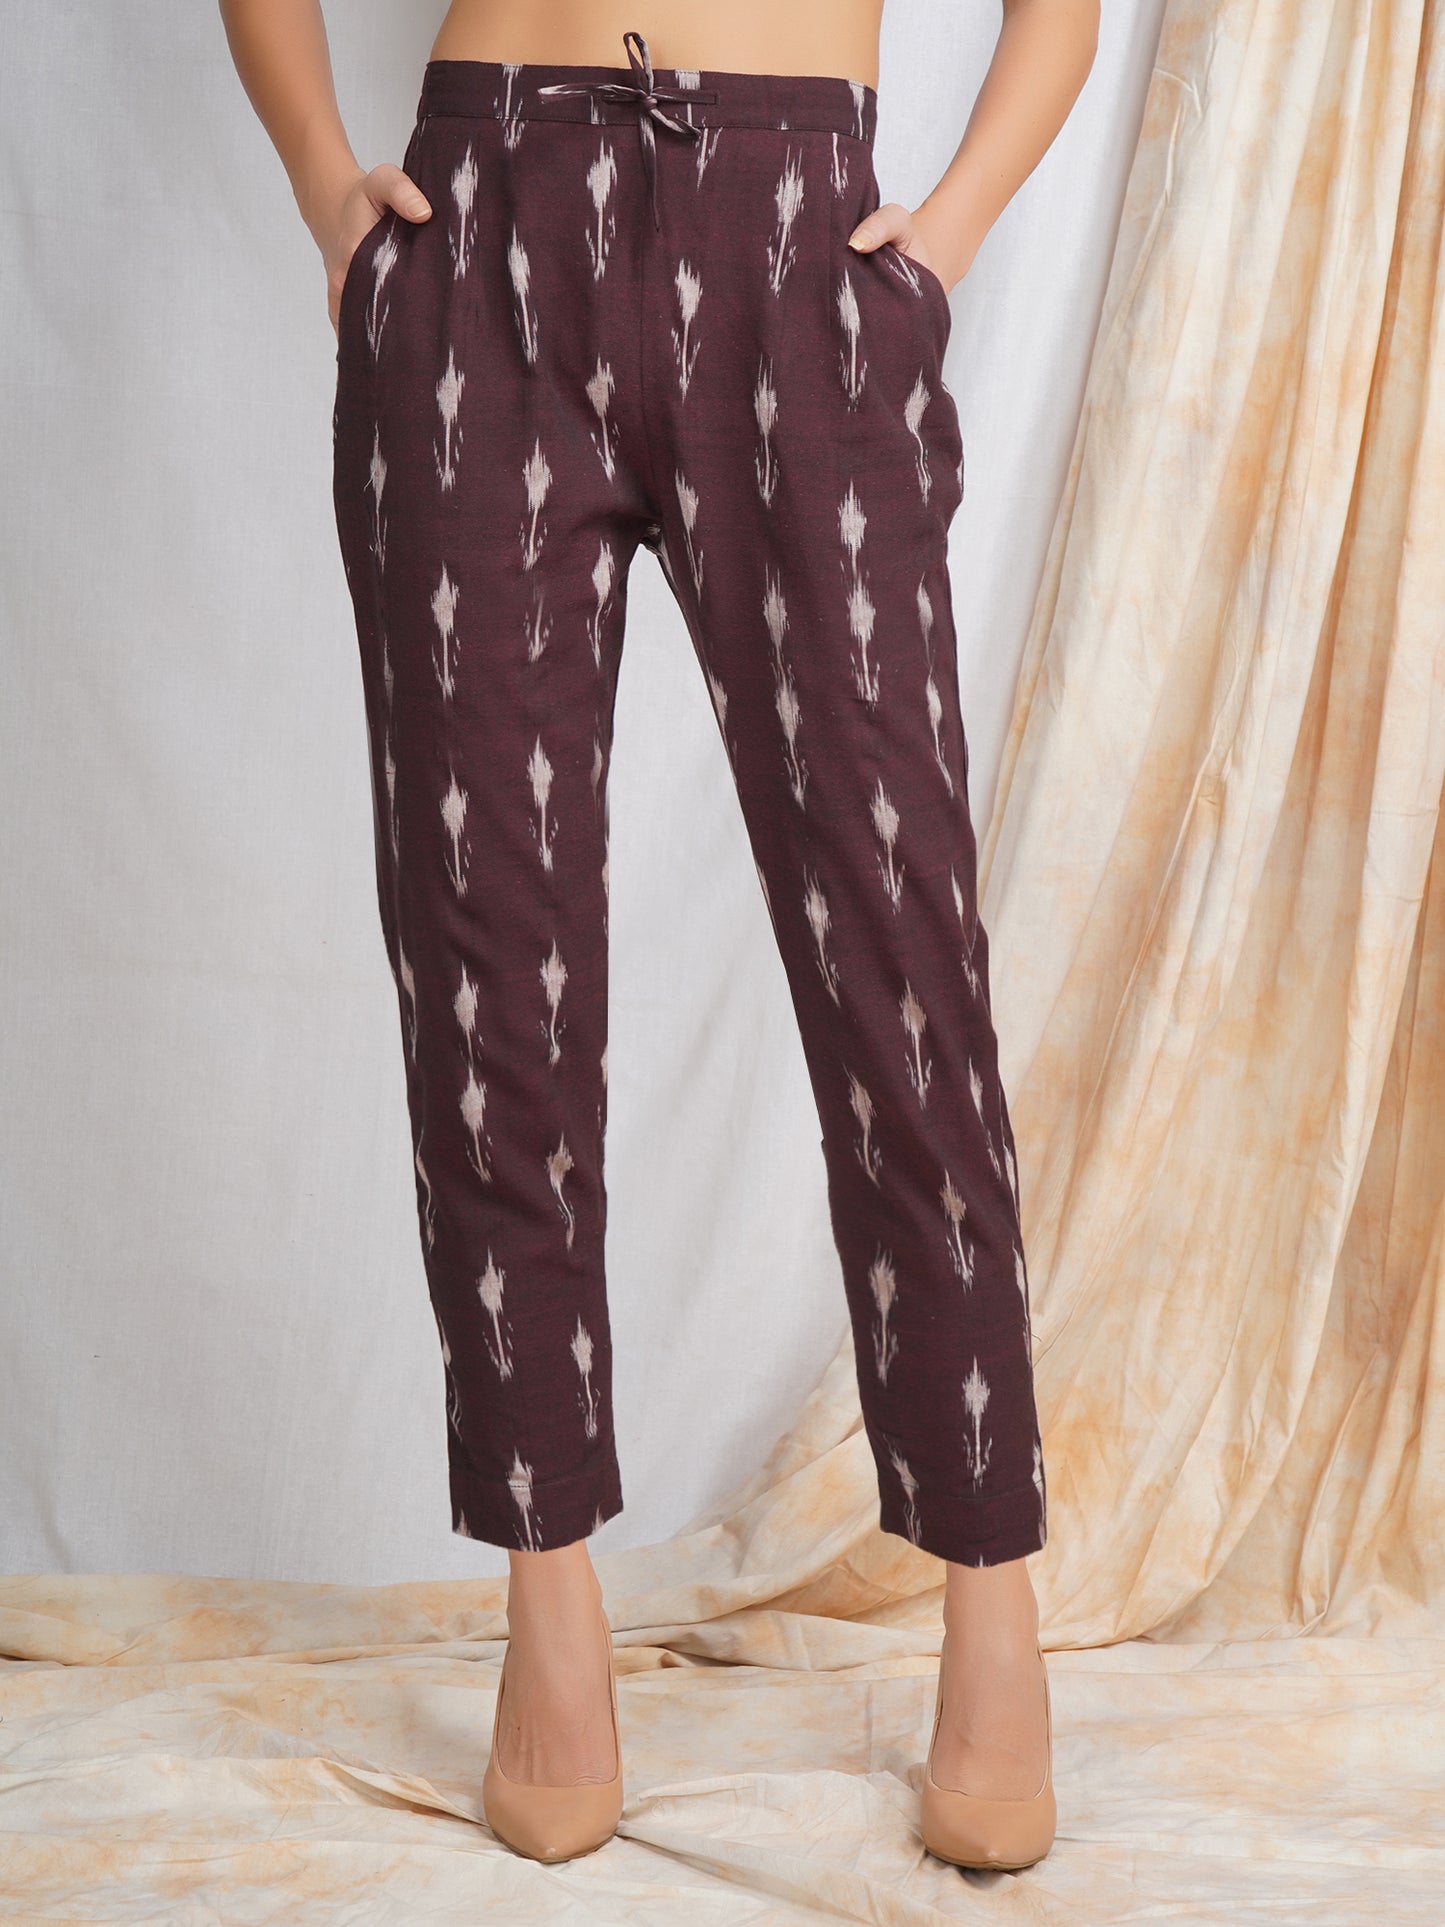 Ikat Cotton Pants in Maroon Color